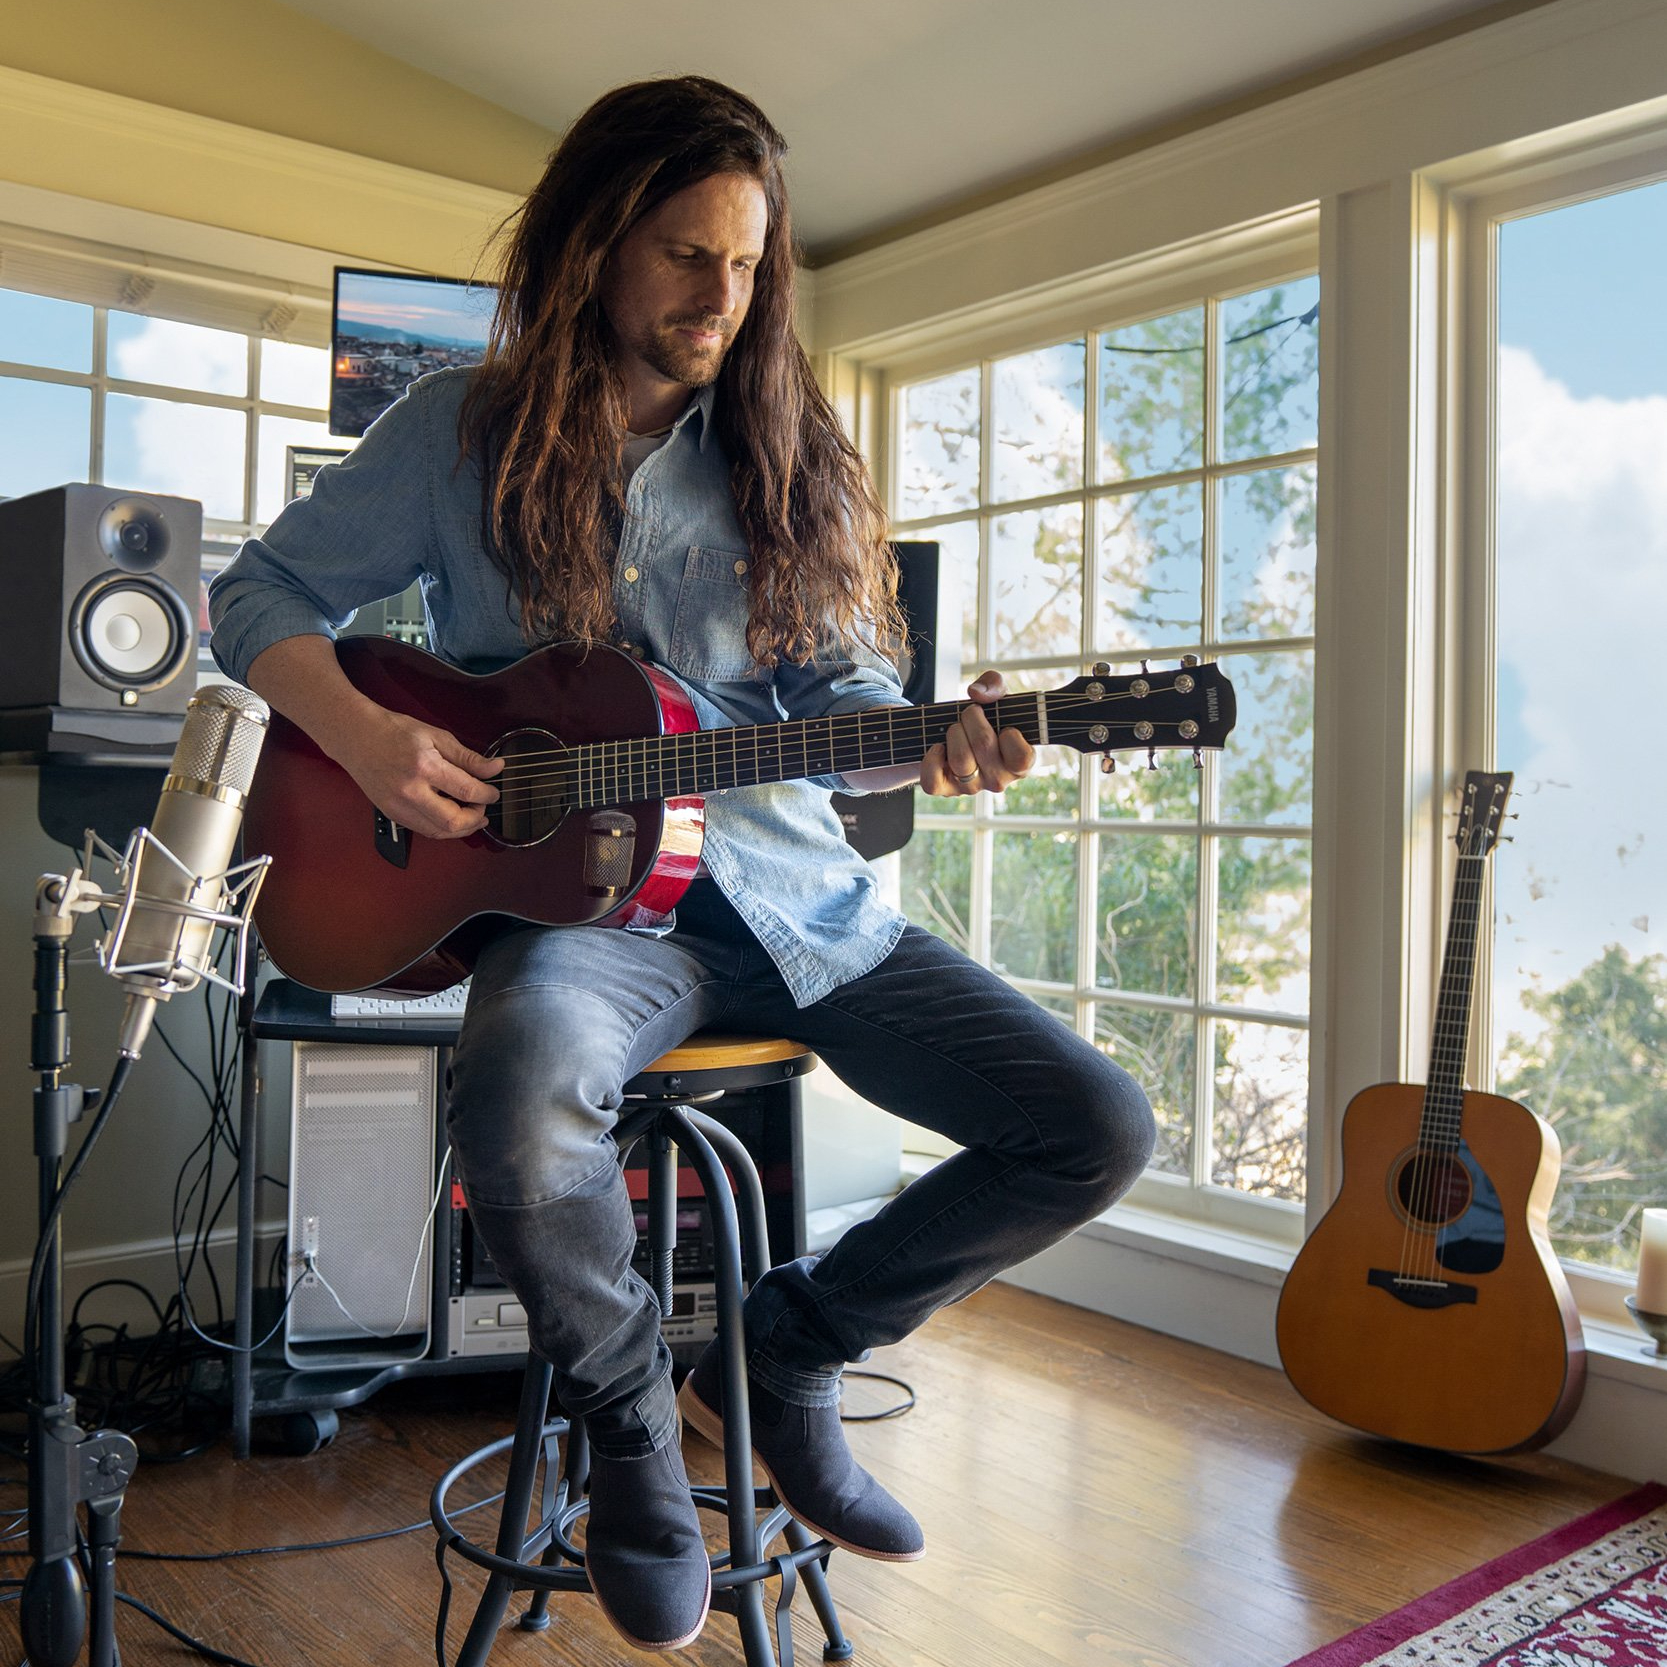 Person playing guitar inside a home studio.